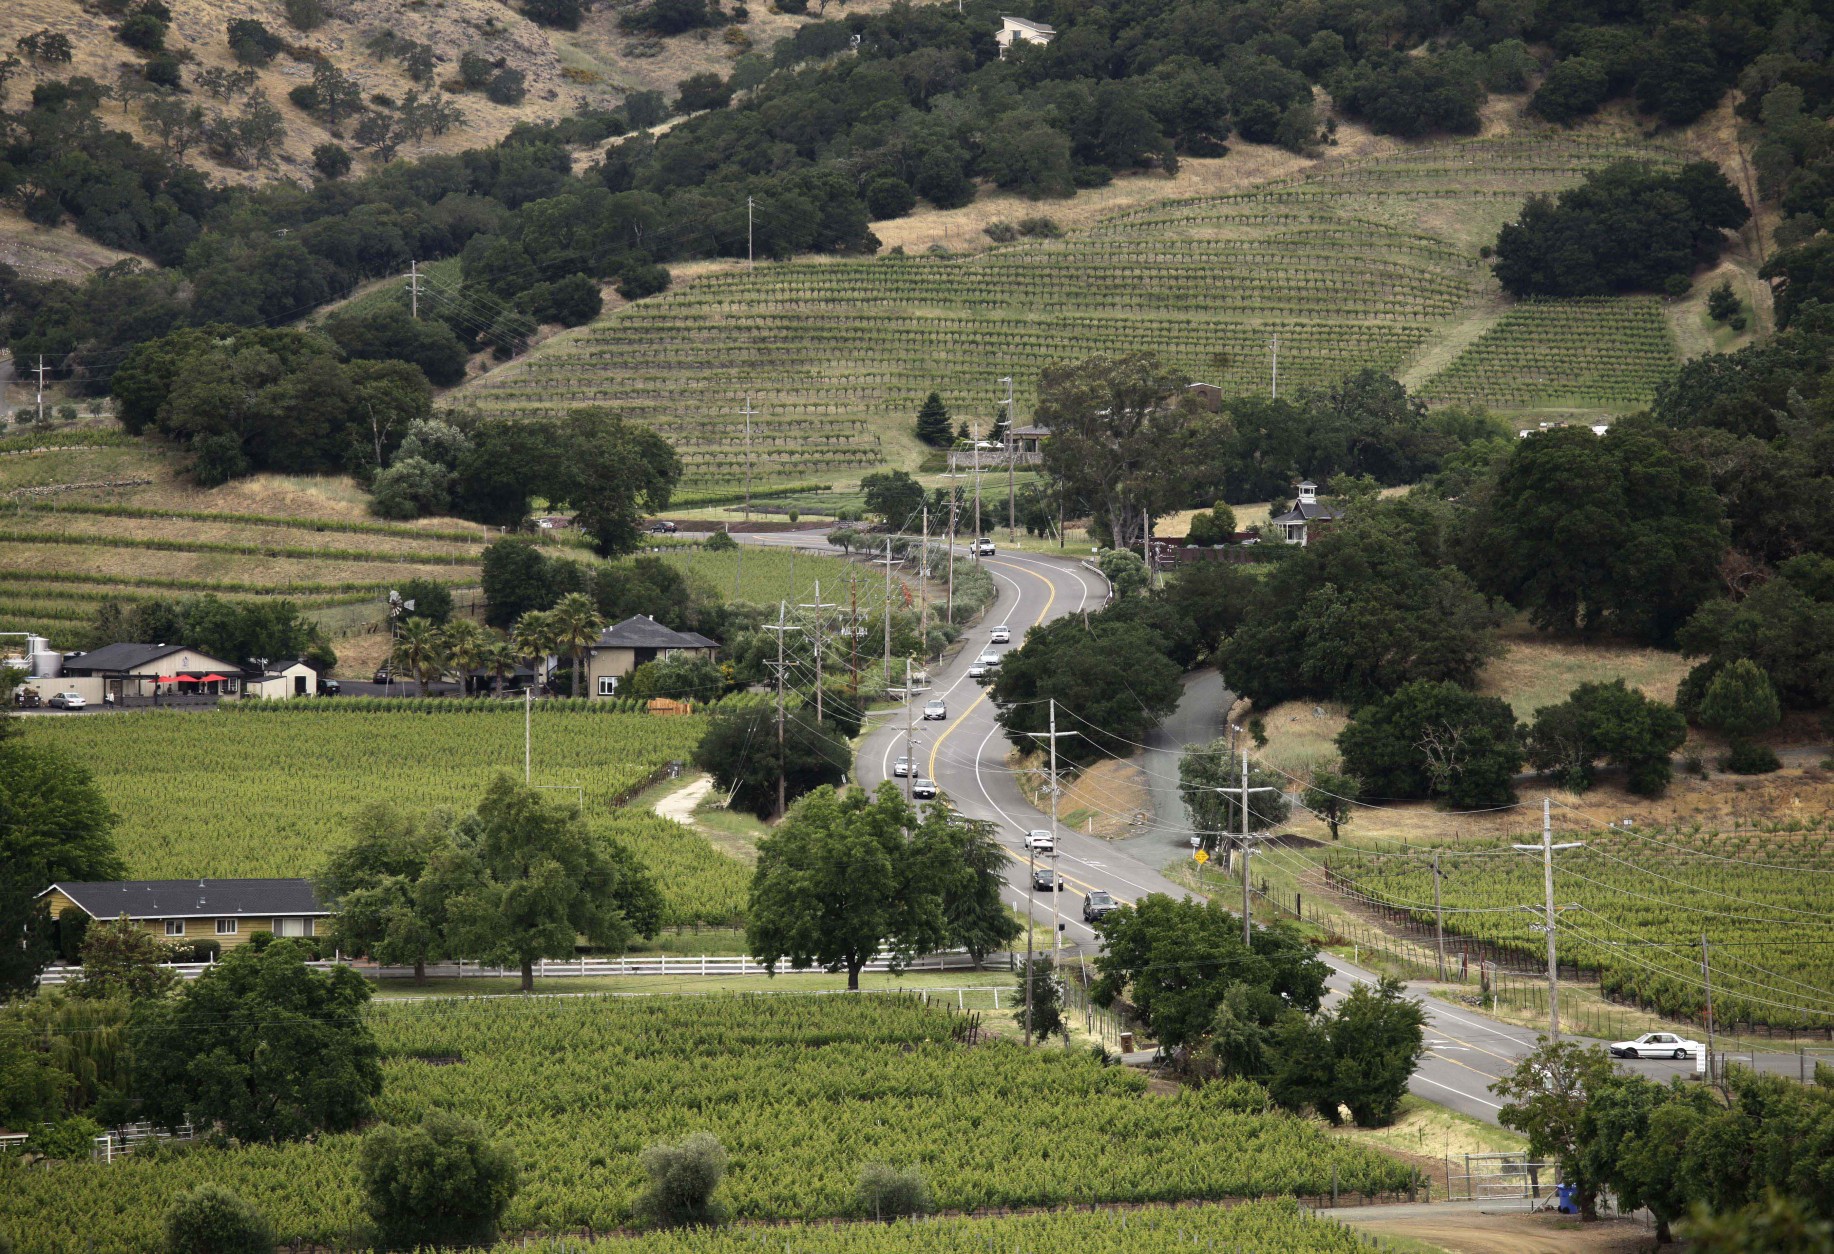 FILE - In this June 2, 2011 file photo, the Silverado Trail winds through the Stags Leap District in this view from Silverado Vineyards in Napa, Calif.The trail more or less runs parallel to Highway 29 but is quieter, winding through green vistas of vineyards and rolling hills. Wineries along this route include Mumm Napa Valley. (AP Photo/Eric Risberg, File)